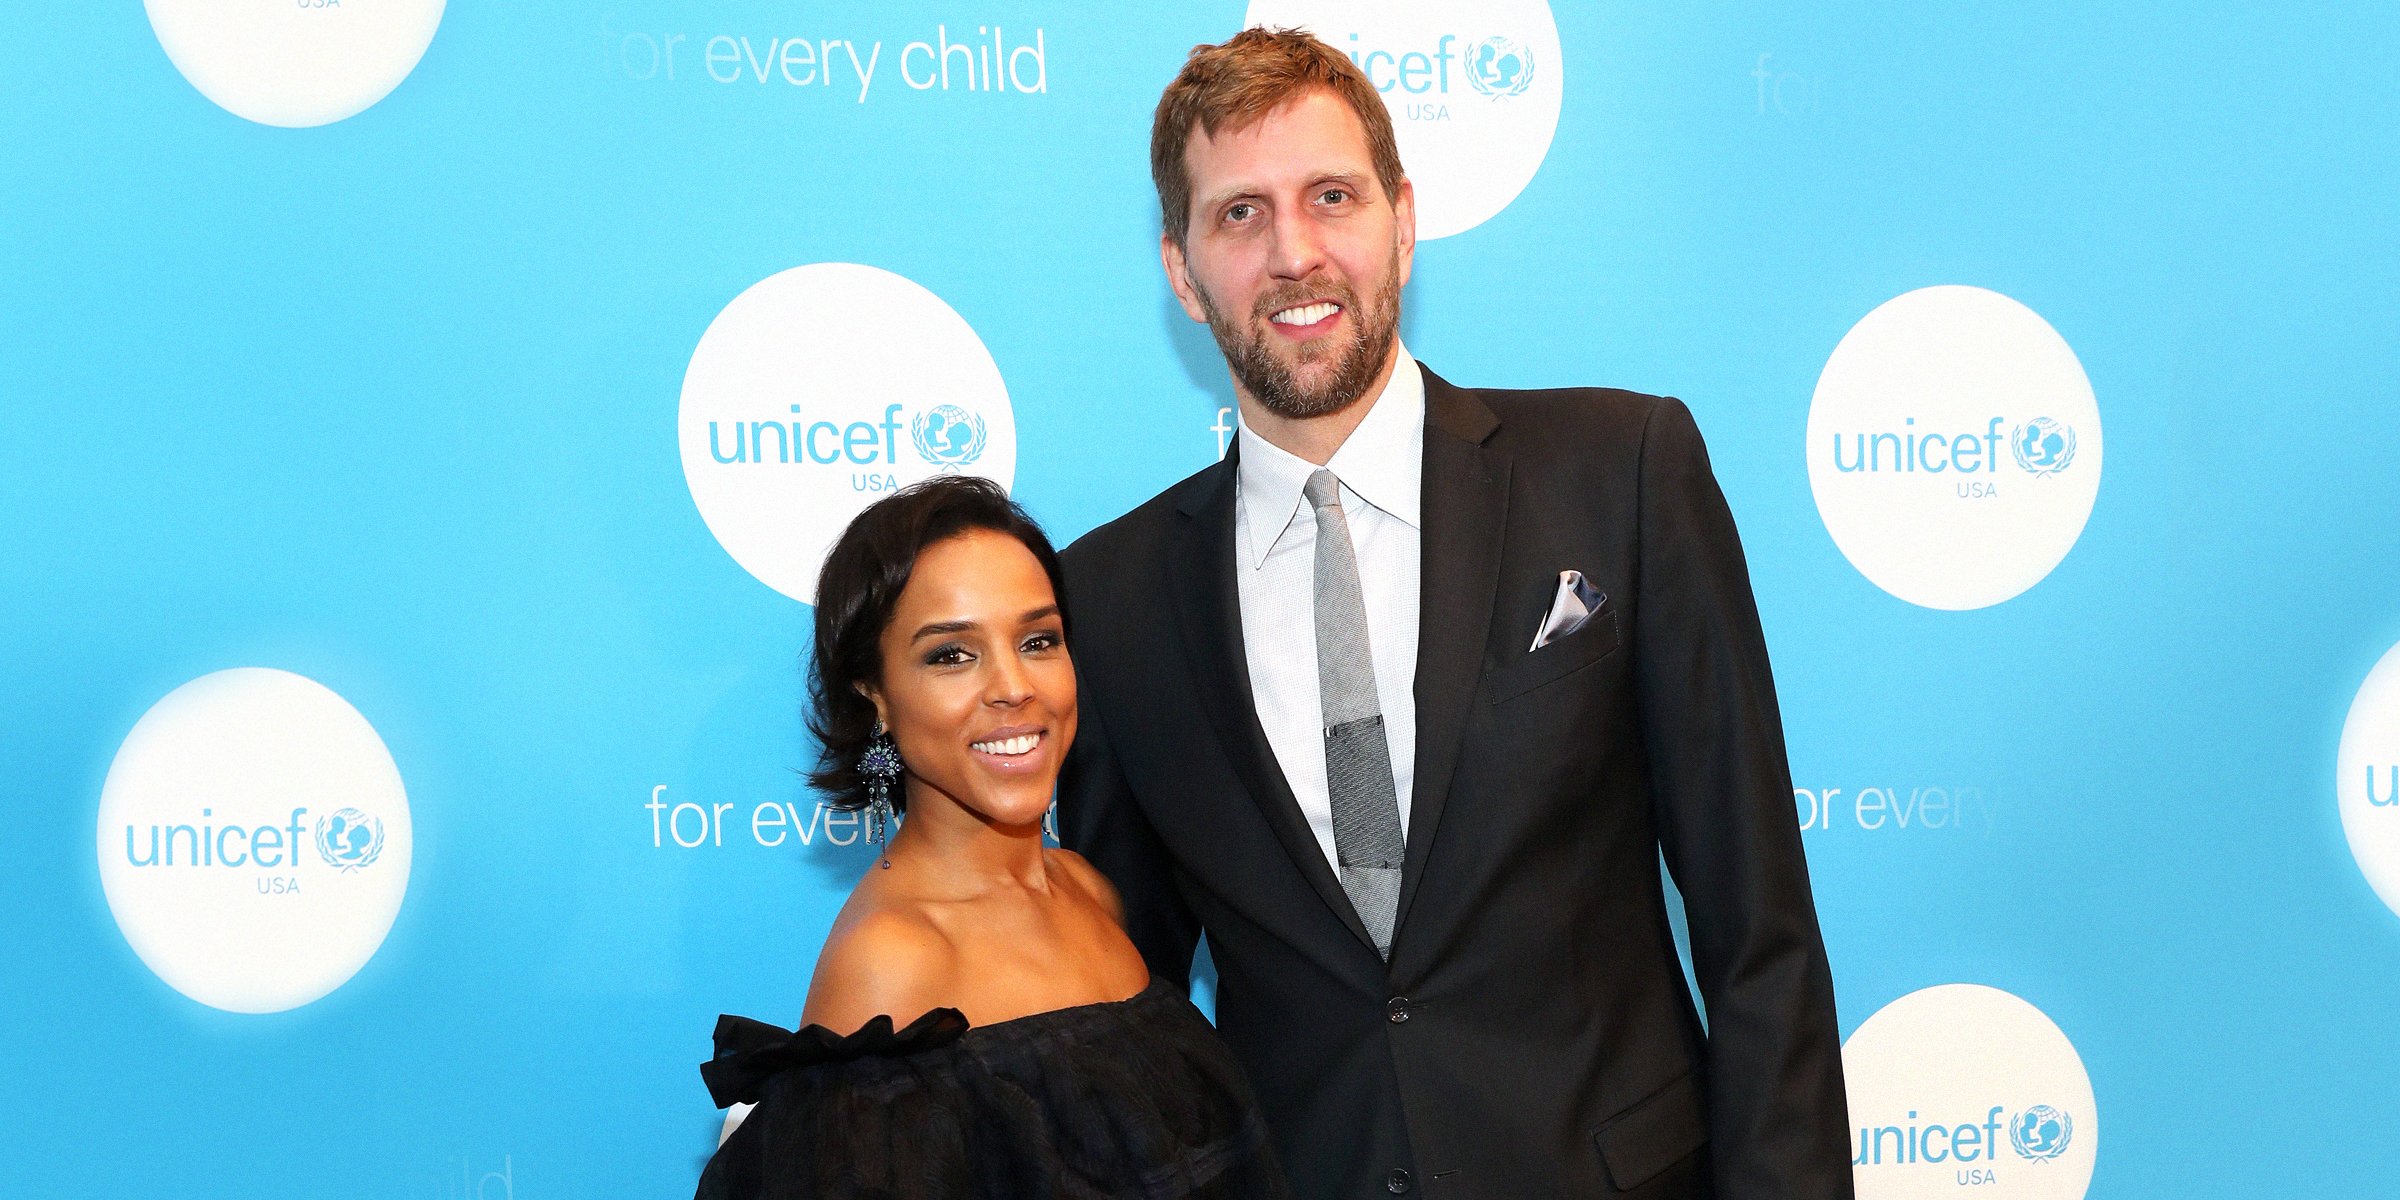 Jessica Olsson and Dirk Nowitzki | Source: Getty Images